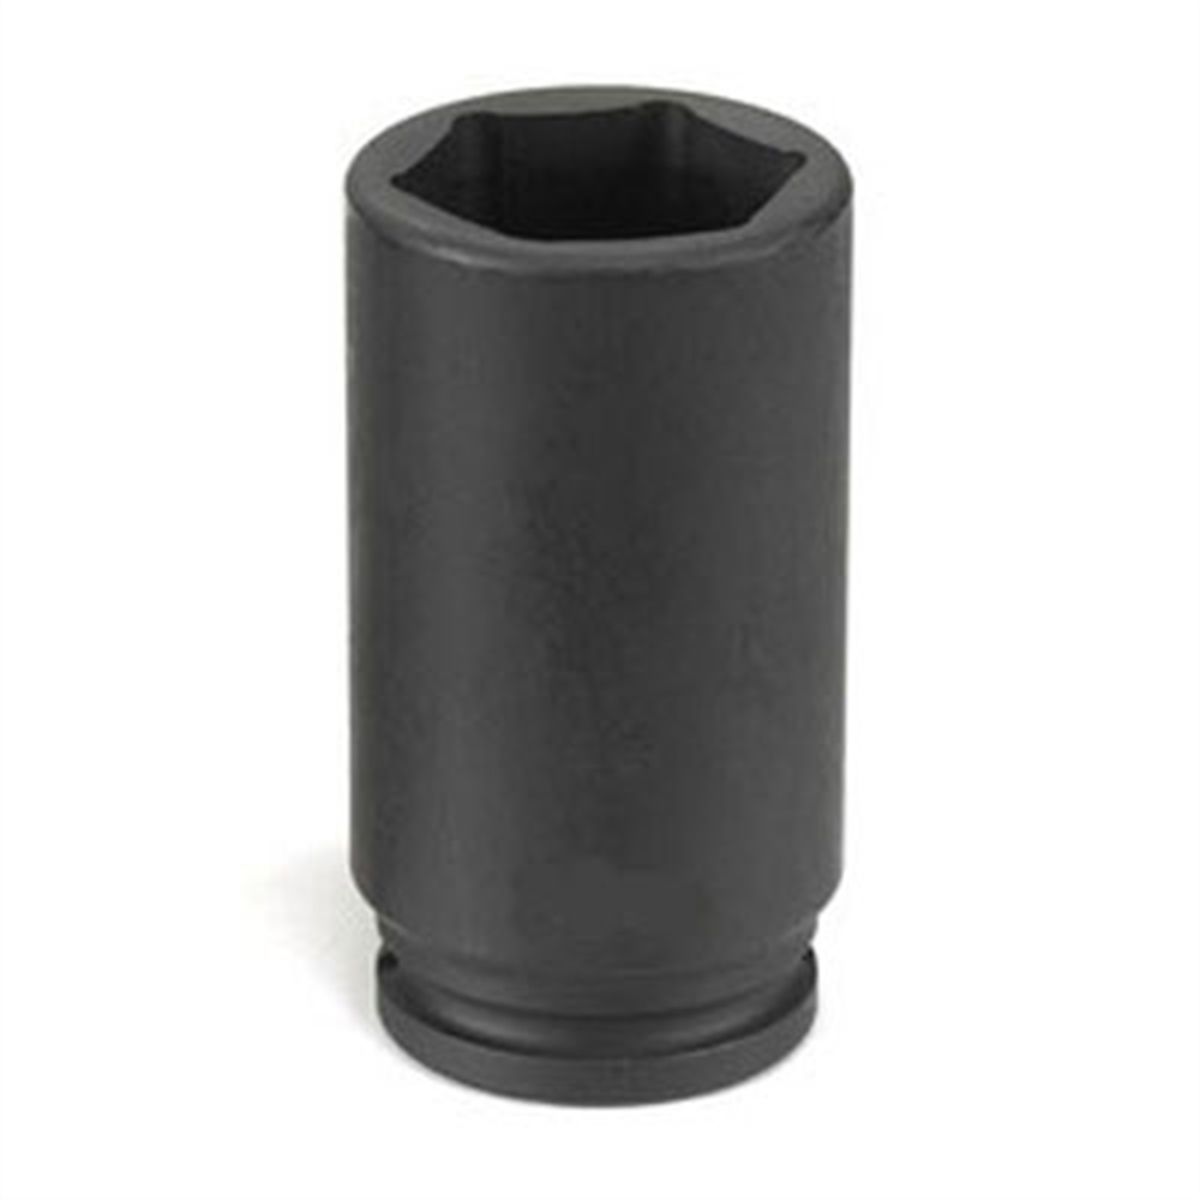 1/2" Drive x 30mm Deep Spindle Nut